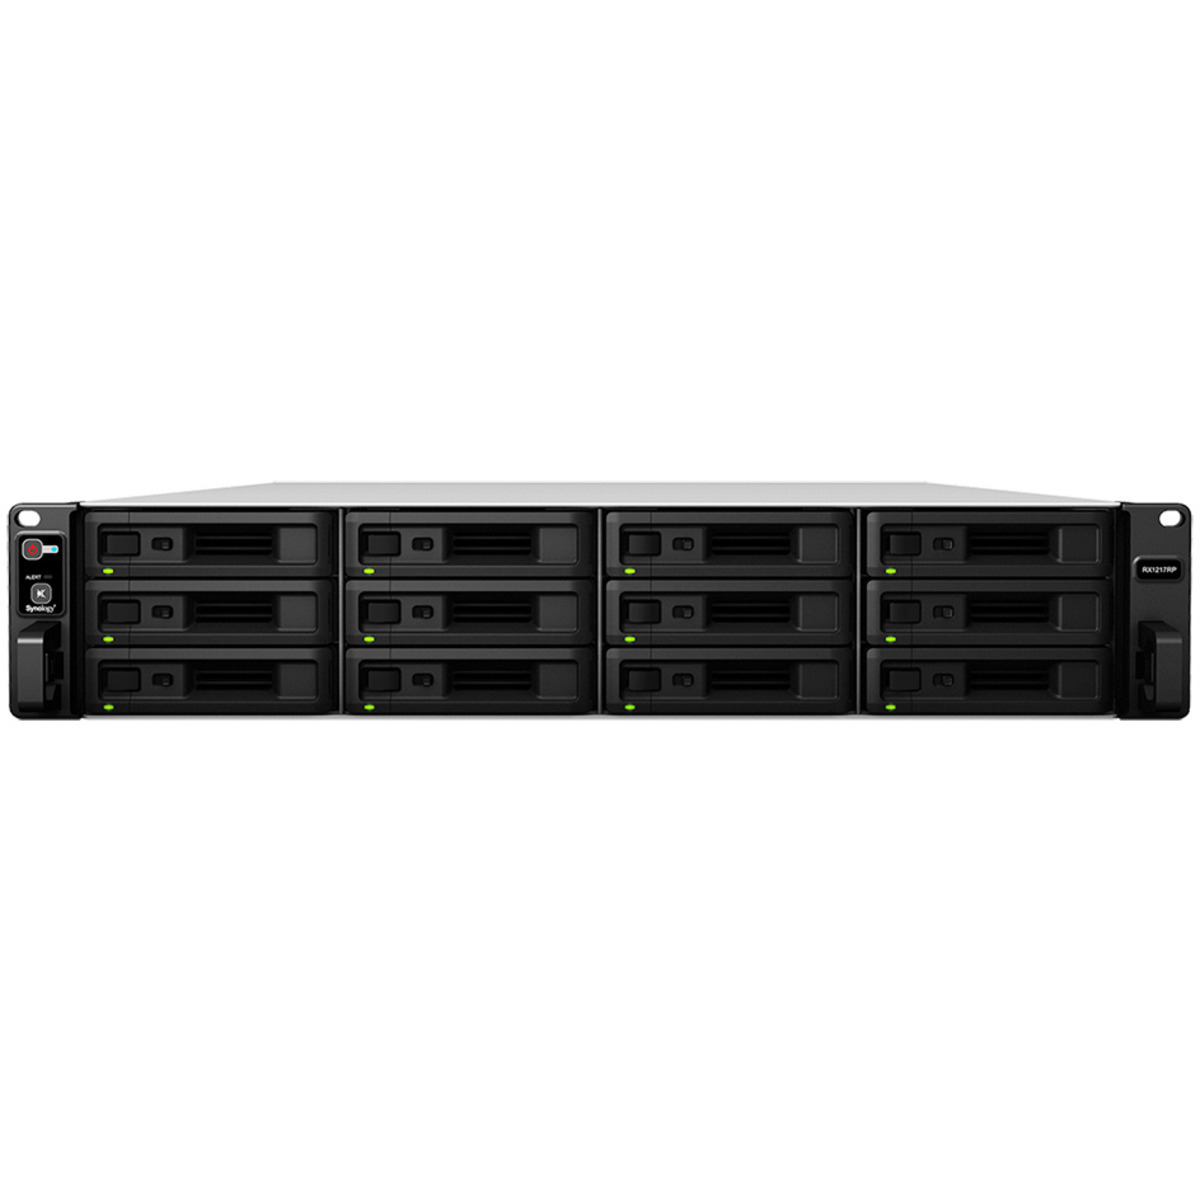 buy $6285 Synology RX1217RP 192tb RackMount Expansion Enclosure 12x16000gb Toshiba Enterprise Capacity MG08ACA16TE 3.5 7200rpm SATA 6Gb/s HDD ENTERPRISE Class Drives Installed - Burn-In Tested - nas headquarters buy network attached storage server device das new raid-5 free shipping usa RX1217RP